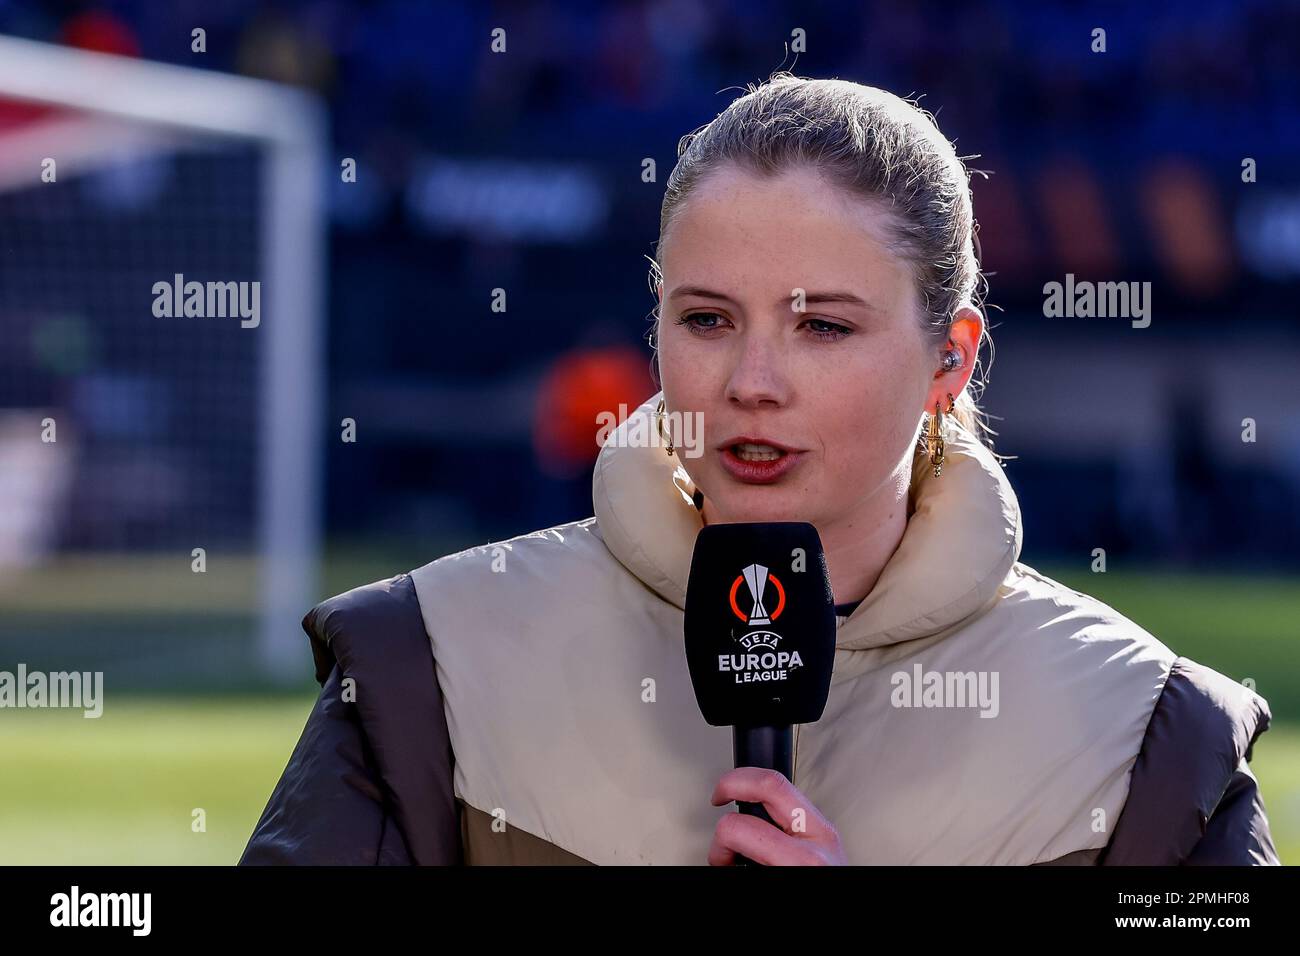 Stadion Feijenoord, Netherlands. 13th Apr, 2023. STADION FEIJENOORD, NETHERLANDS - APRIL 13: Noa Vahle presenter of RTL 7 after the Quarterfinal First Leg - UEFA Europa League match between Feyenoord and AS Roma at the Rotterdam on April 13, 2023 in Stadion Feijenoord, Netherlands (Photo by Marcel ter Bals/Orange Pictures) Credit: Orange Pics BV/Alamy Live News Stock Photo